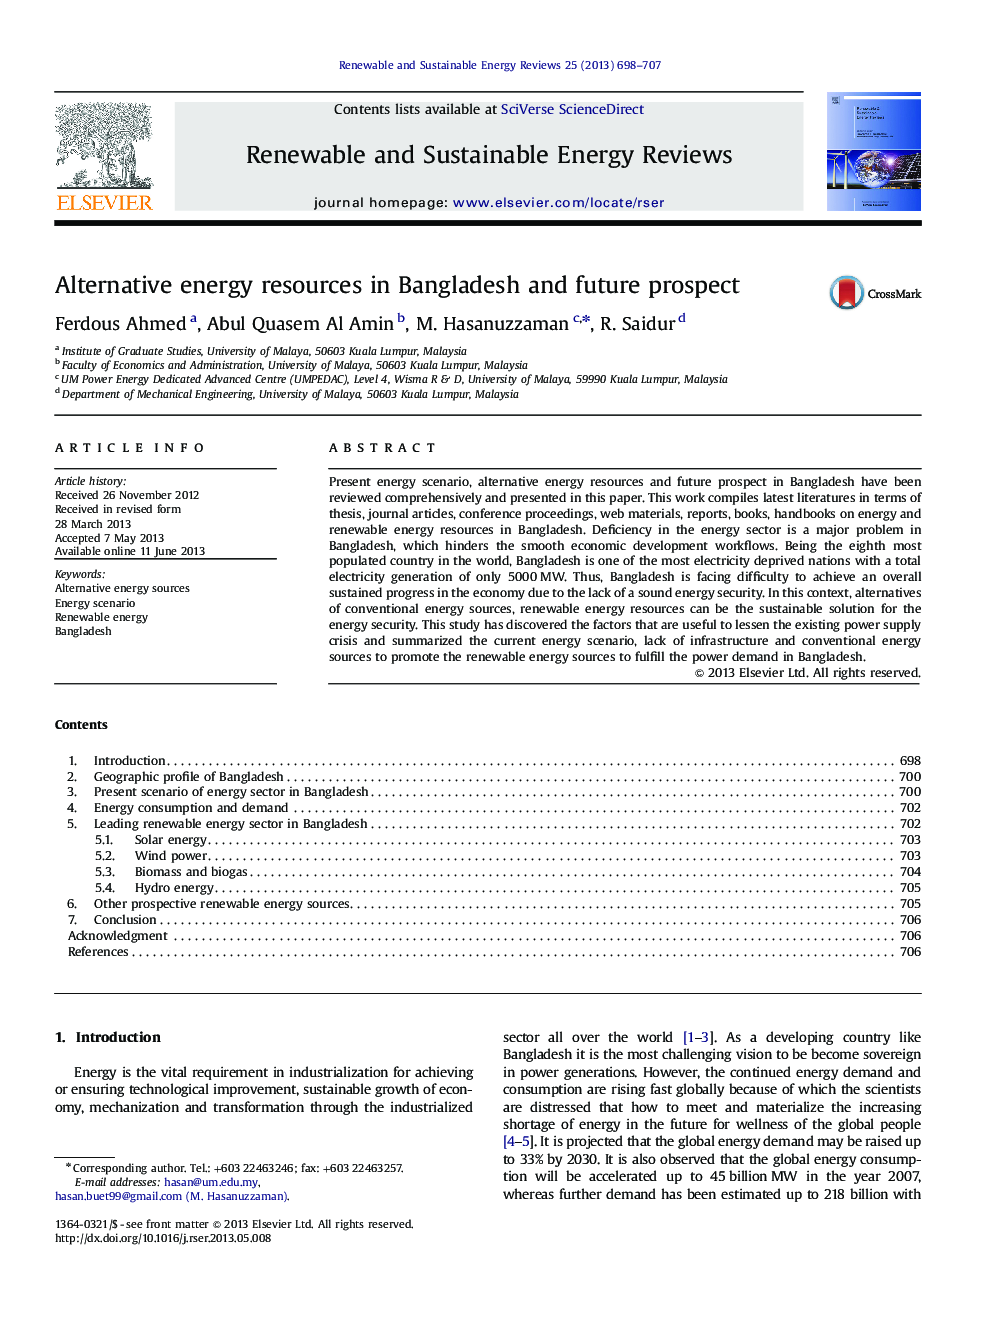 Alternative energy resources in Bangladesh and future prospect